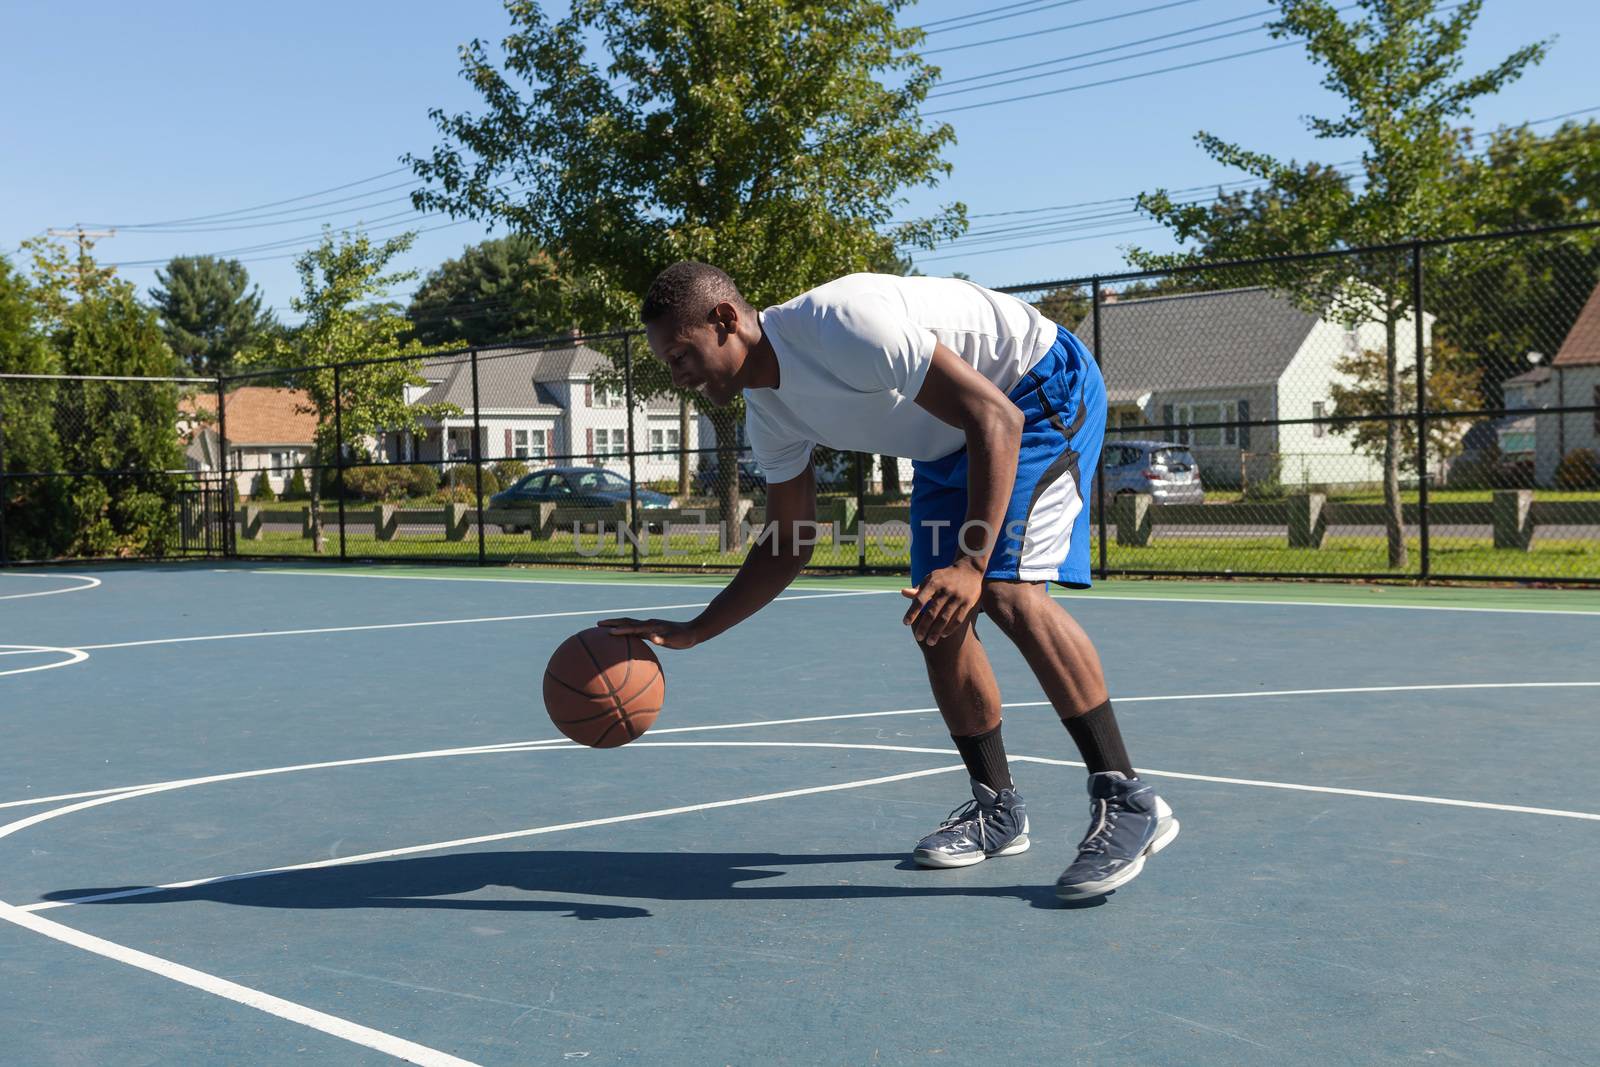 A sweaty young basketball player dribbling down the court demonstrating his ball handling skills.